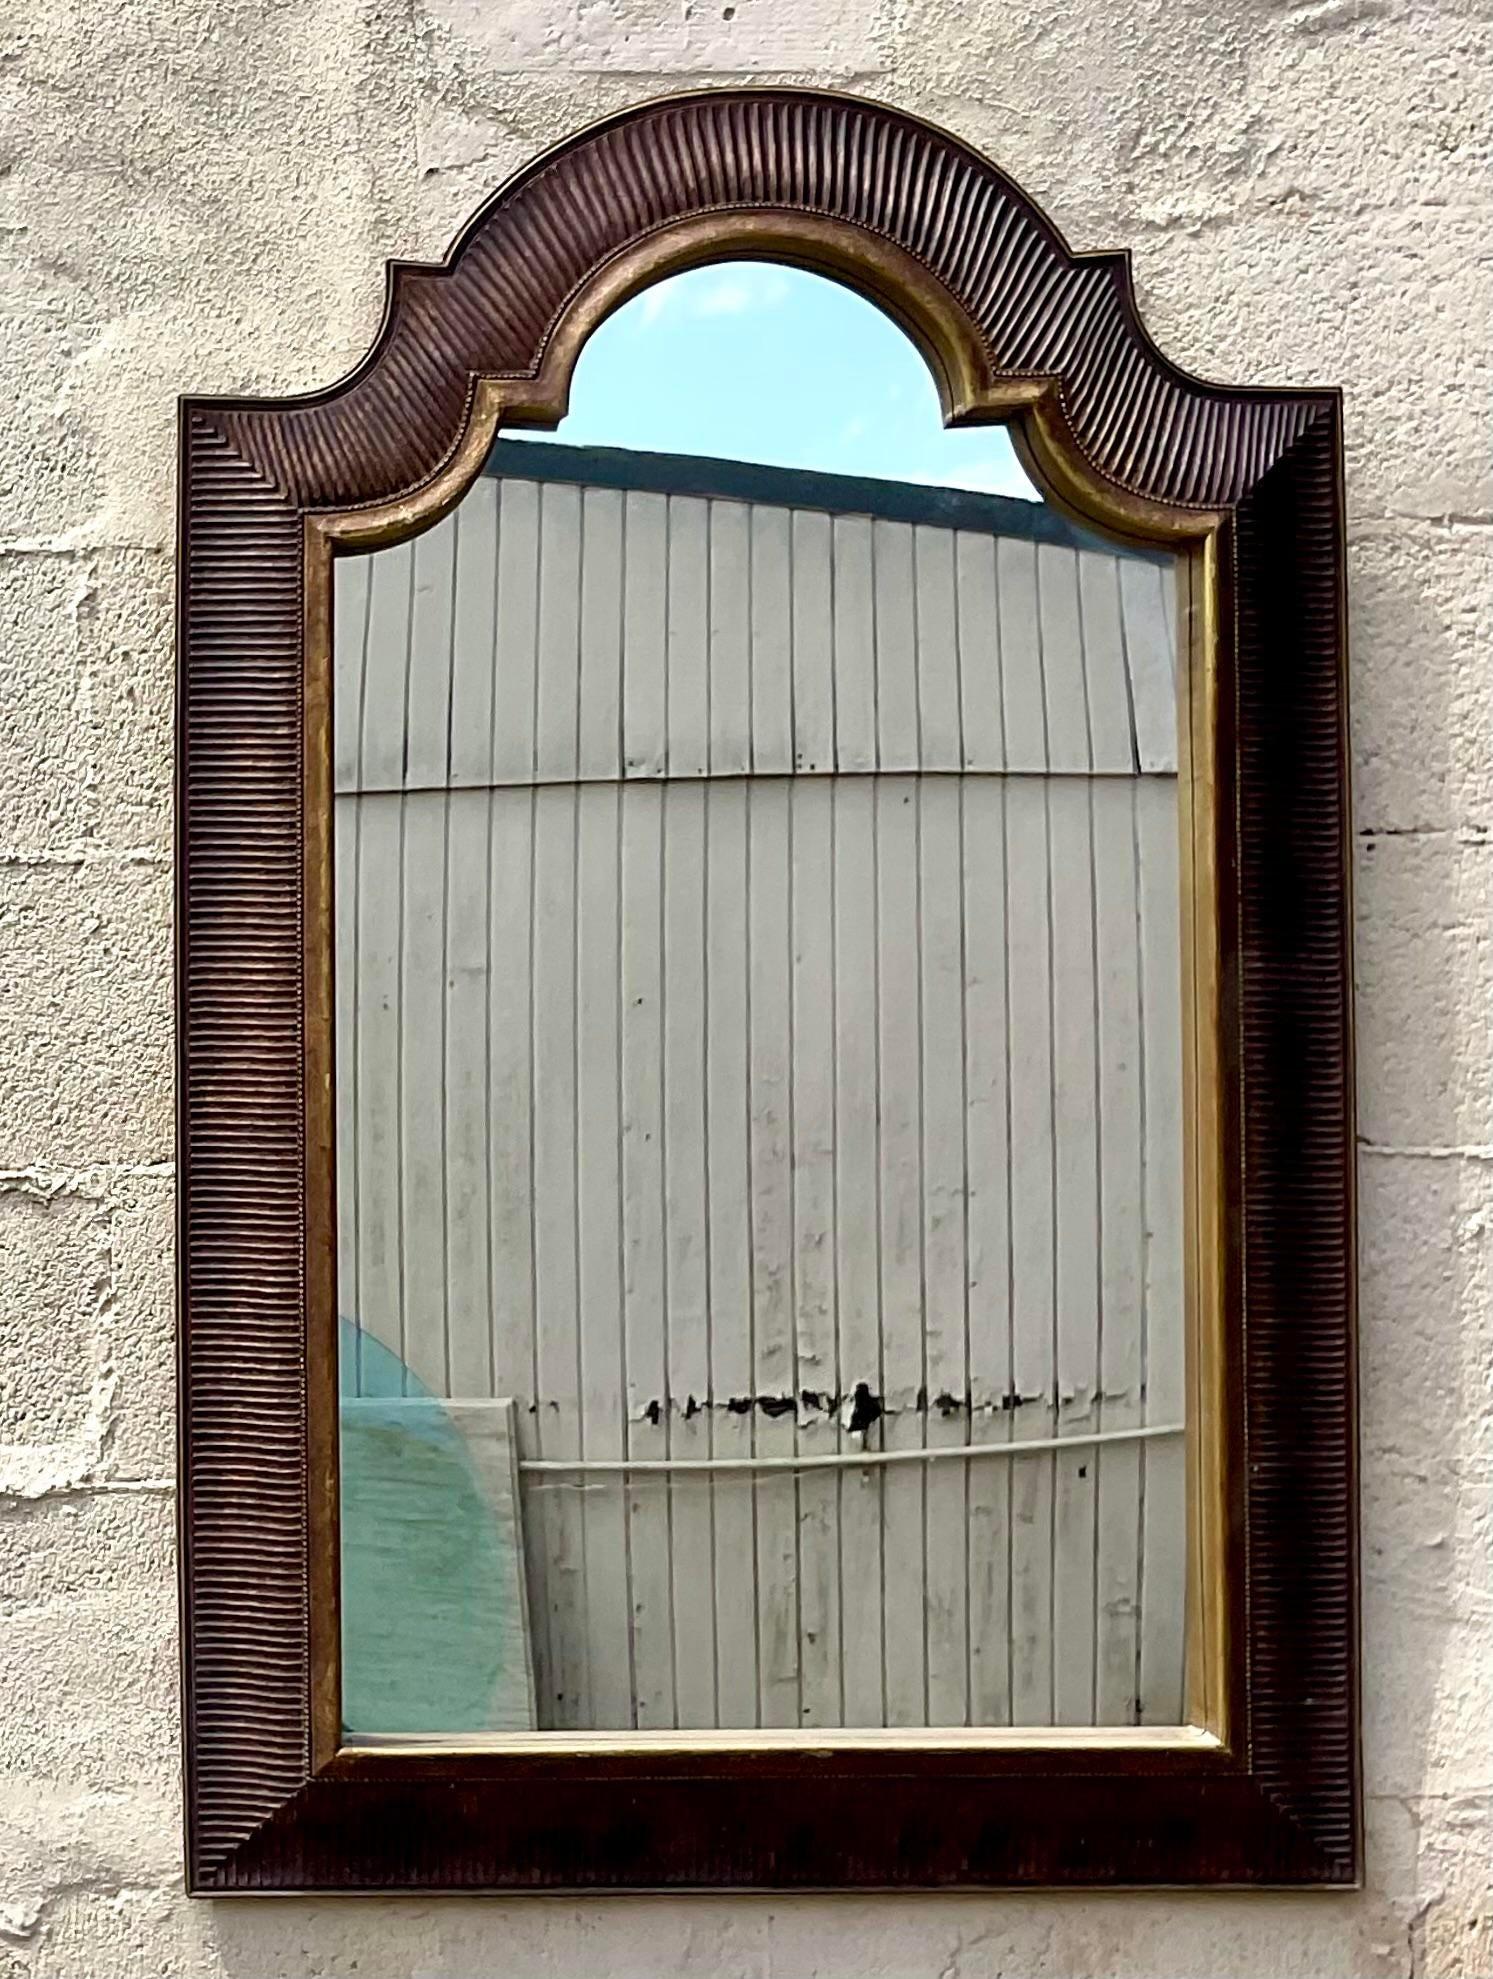 Elevate your decor with this vintage Regency gilt-tipped arched mirror. American-crafted with classic elegance, its arched design and gilt accents add a touch of timeless sophistication, making it a stunning focal point for any room.